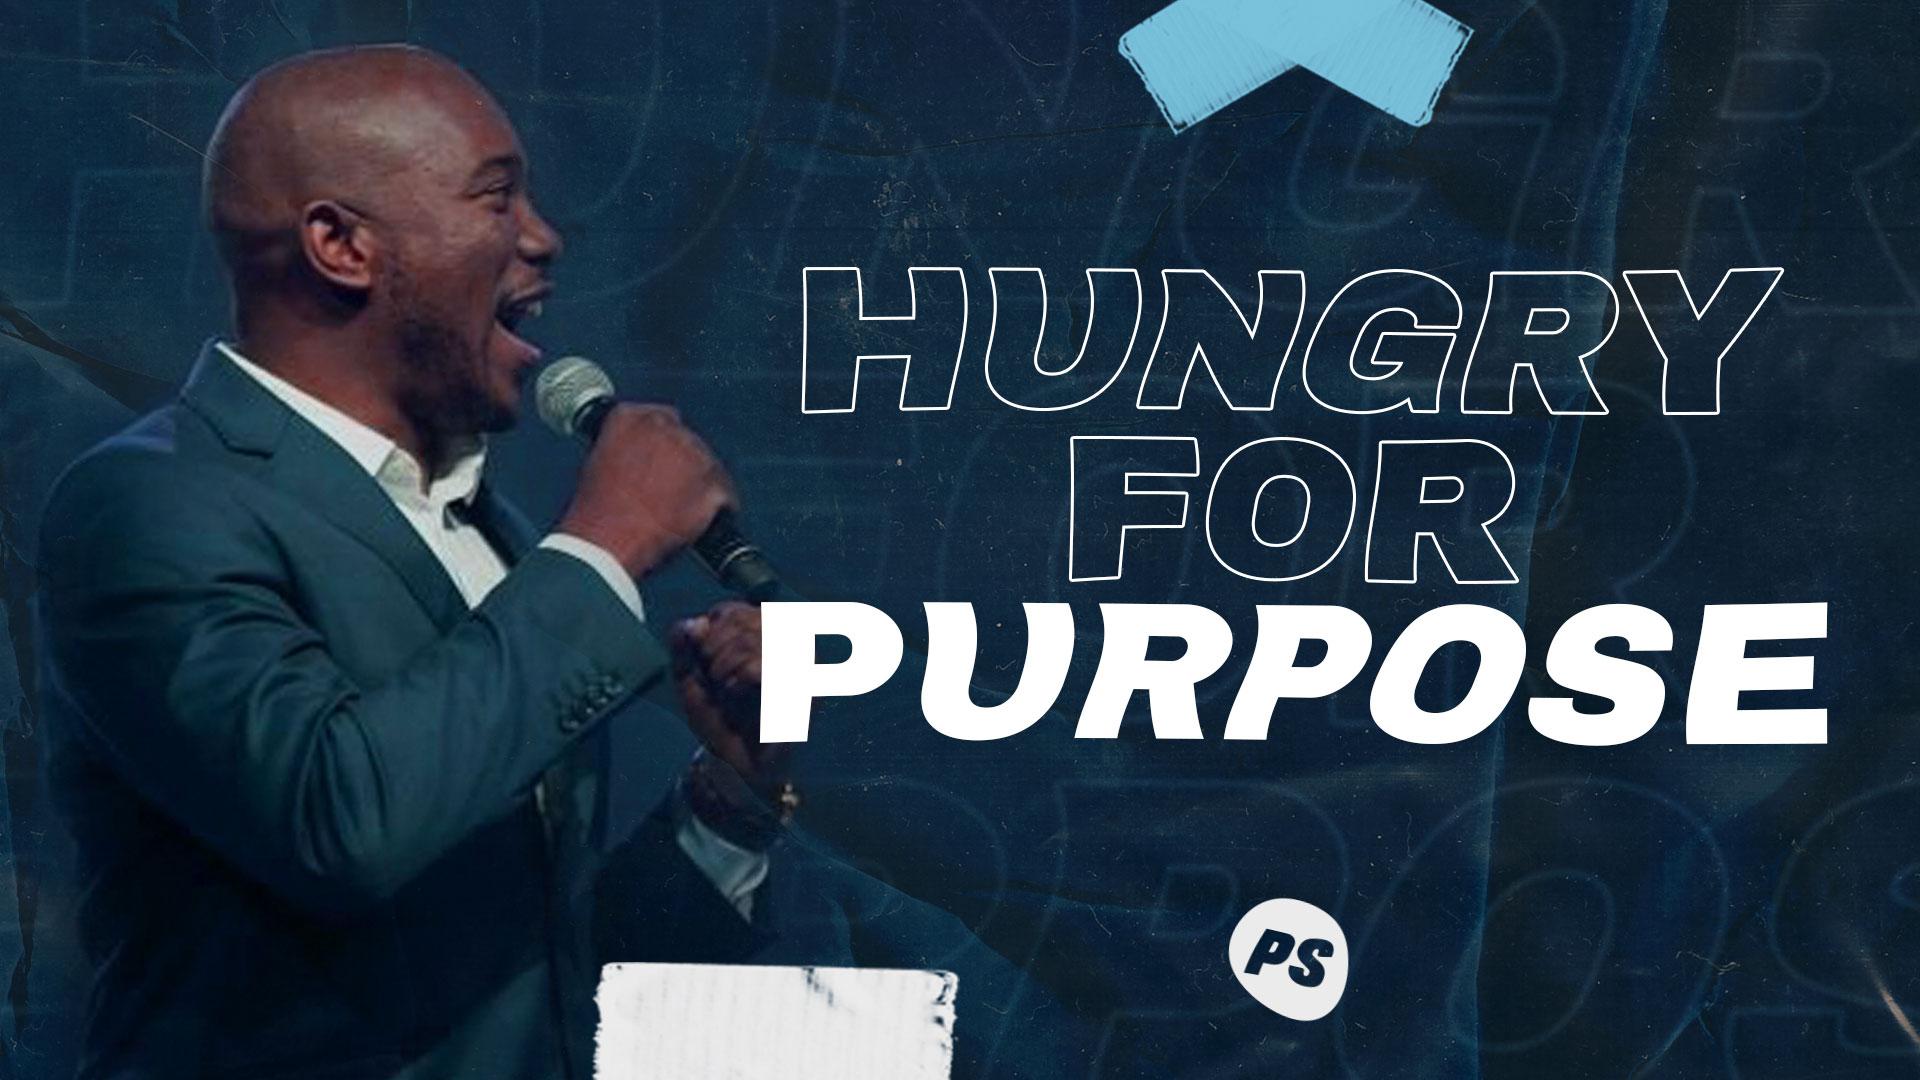 Featured Image for “Hungry for Purpose”